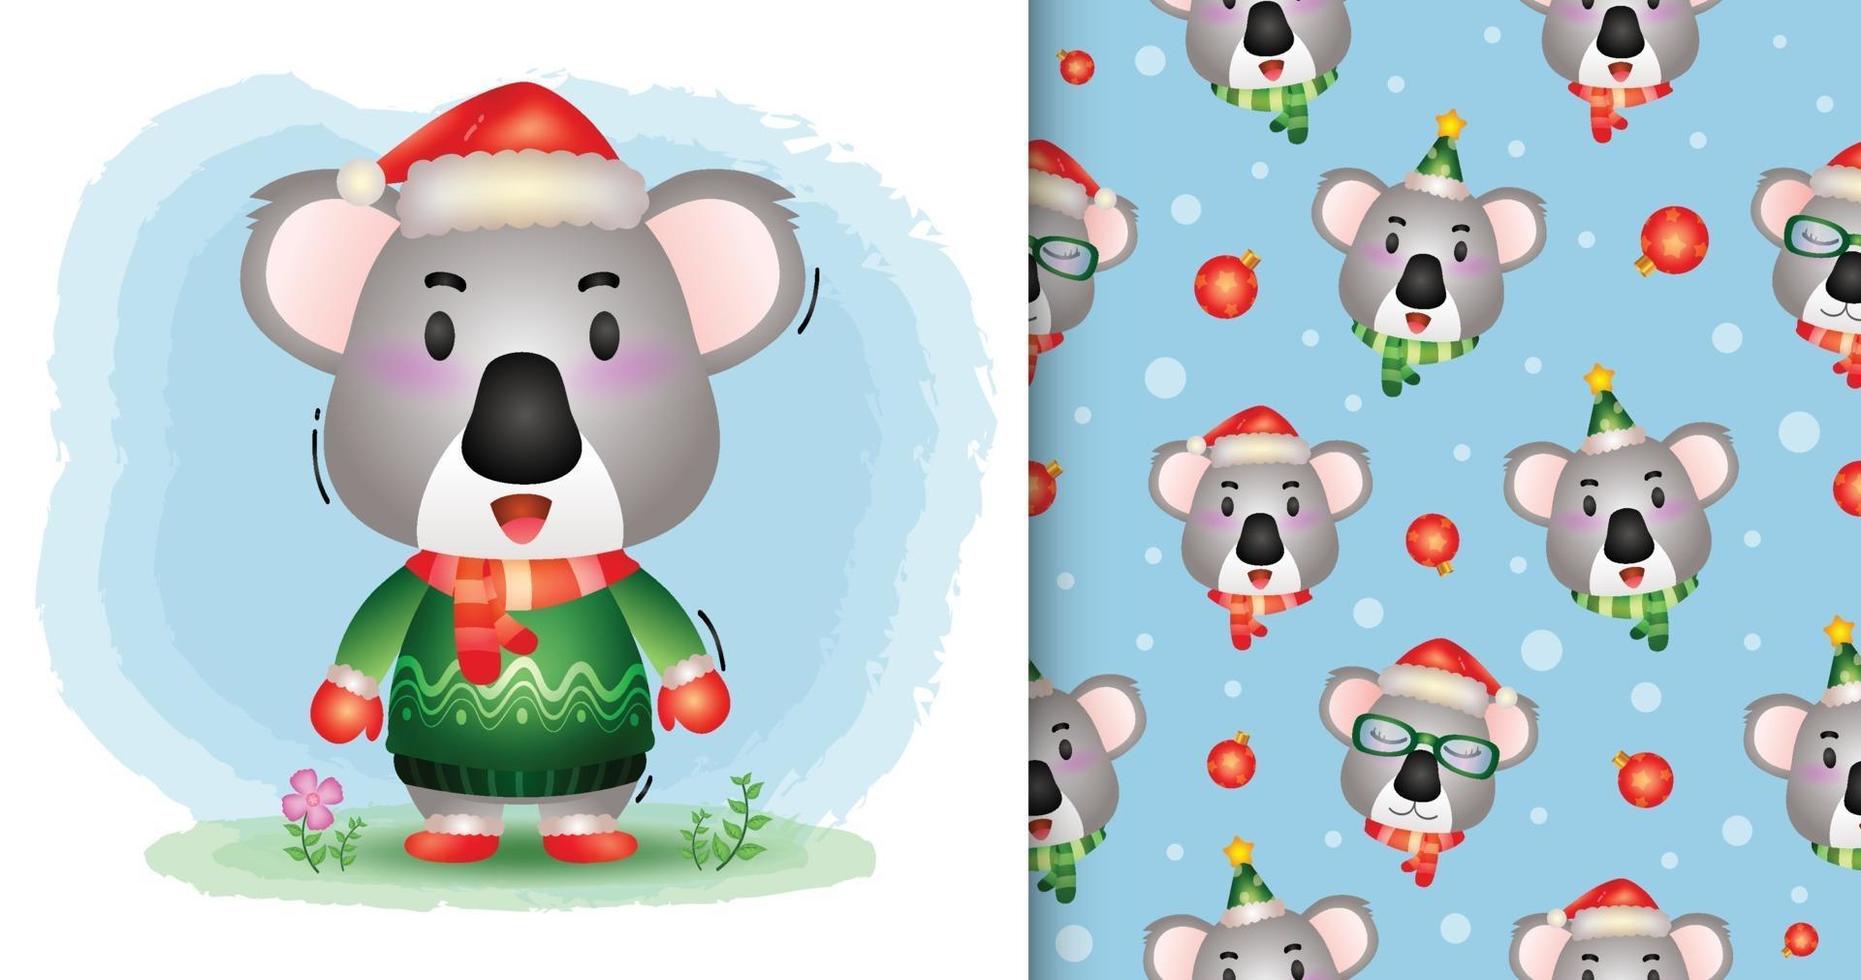 a cute koala christmas characters collection. seamless pattern vector